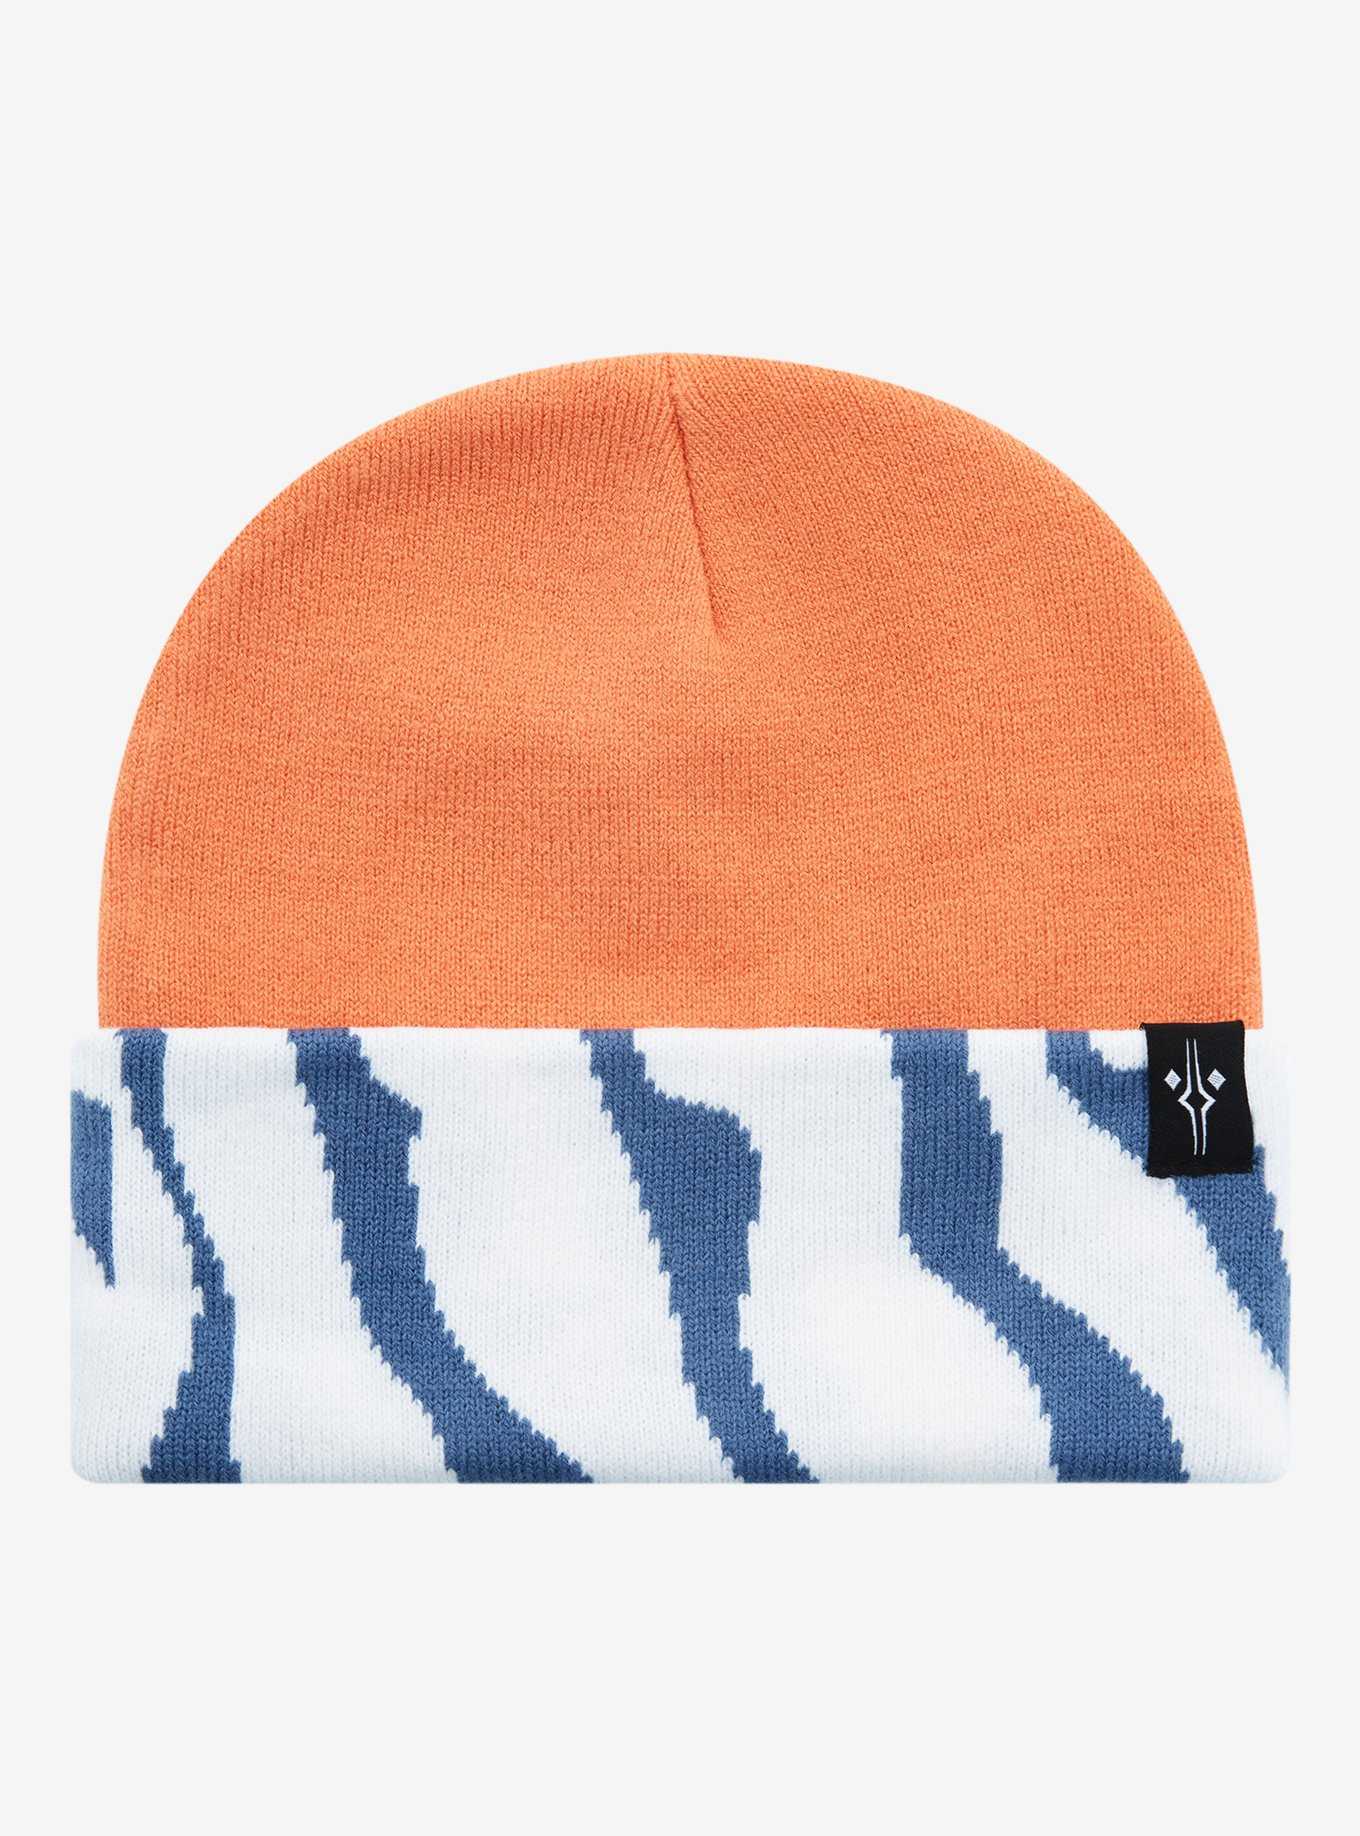 Cool Beanies: Slouchy, Culture Trendy | Beanies BoxLunch Pop 